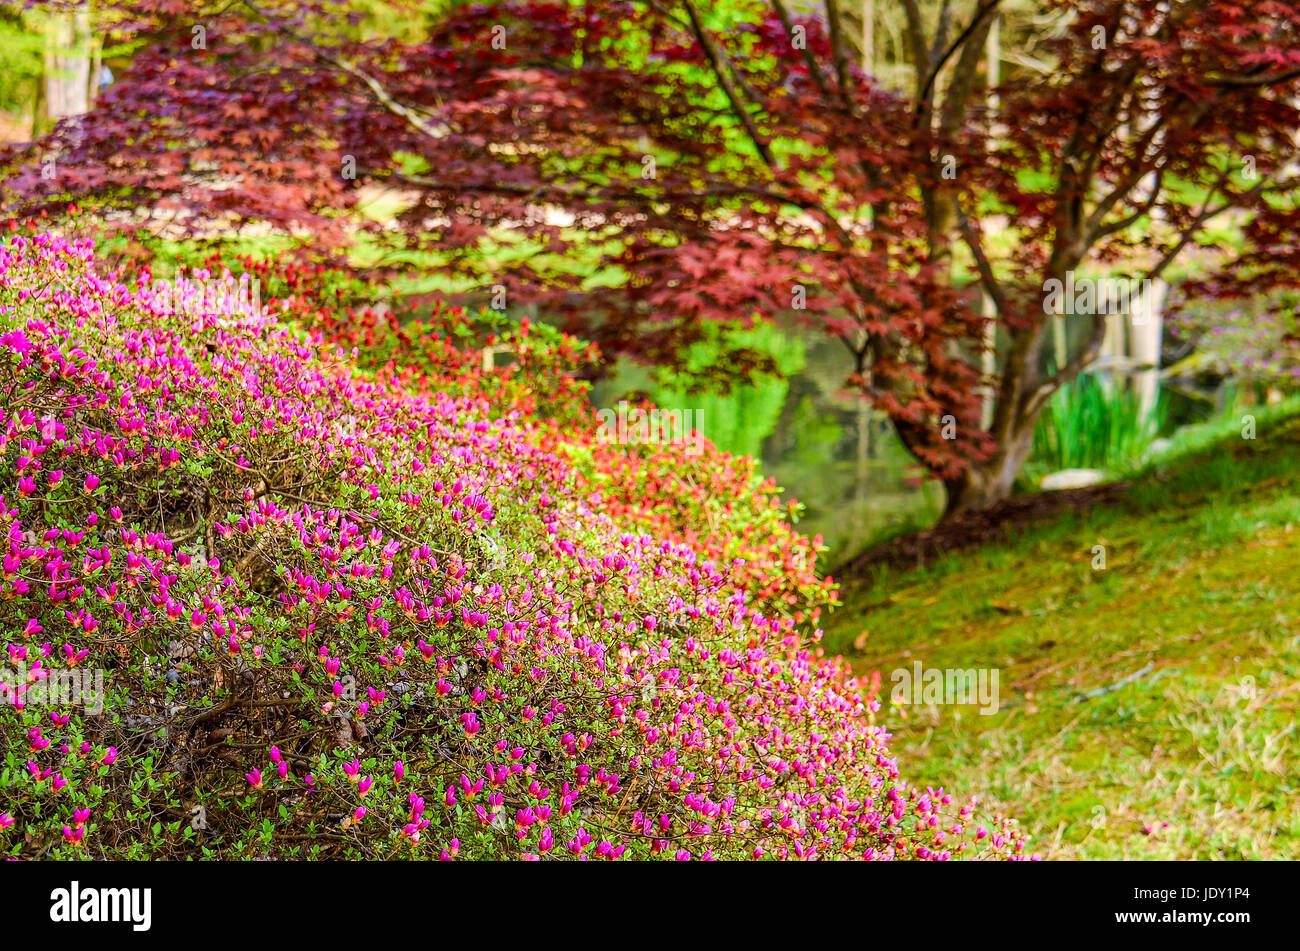 Japanese red maple tree with pink flowers on bush in garden during spring Stock Photo